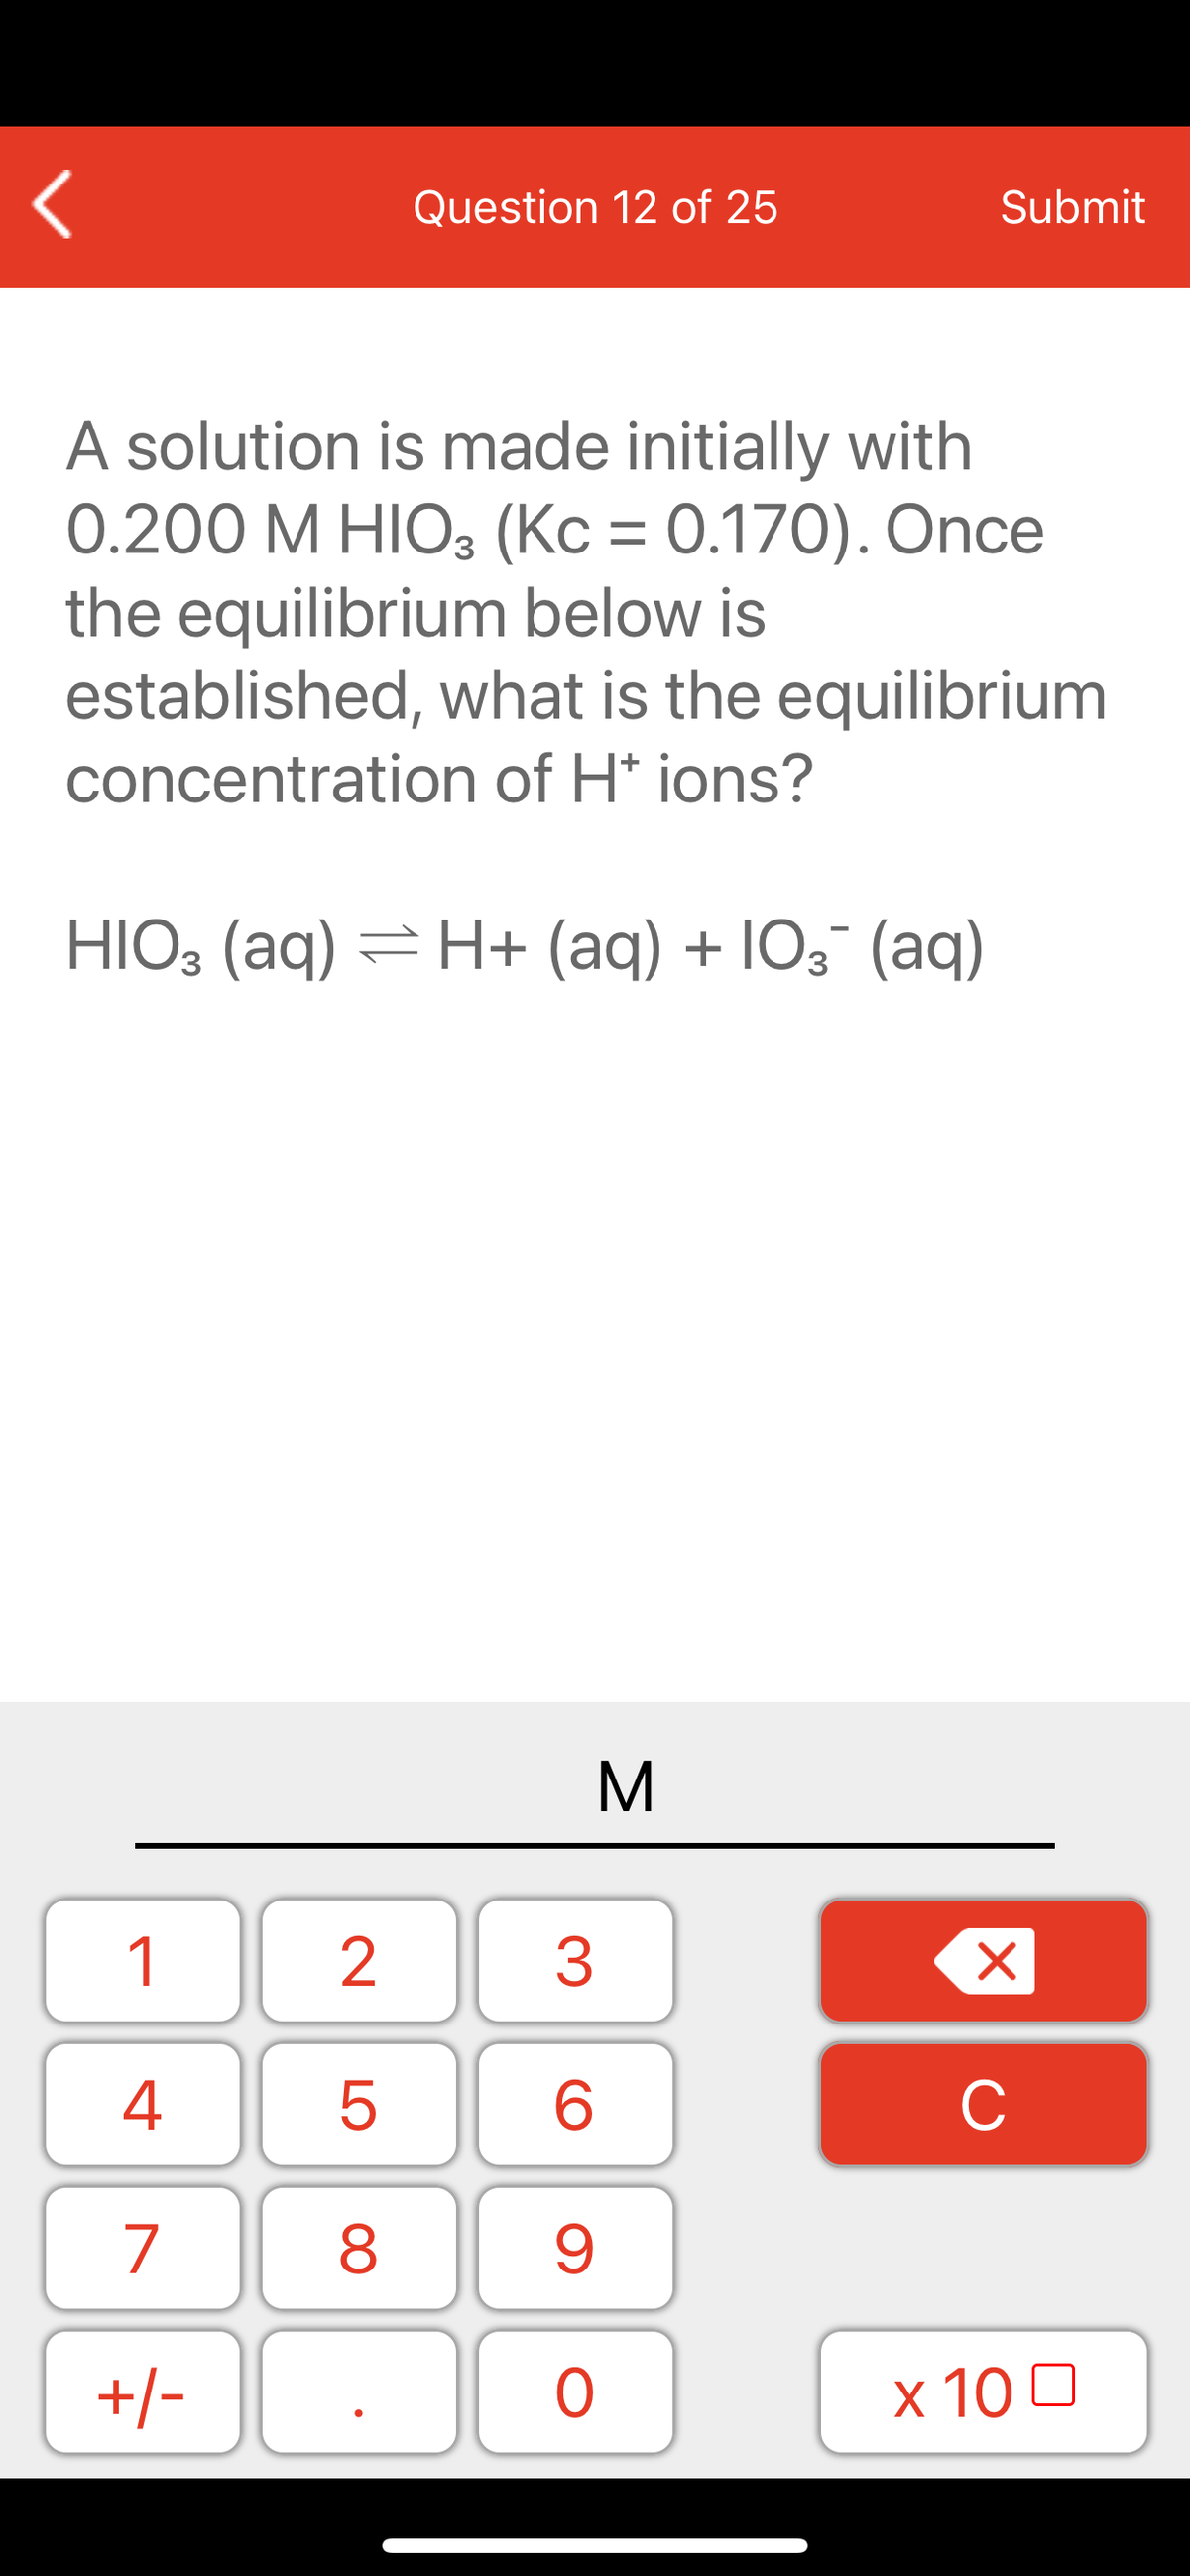 Question 12 of 25
Submit
A solution is made initially with
0.200 M HIO3 (Kc = 0.170). Once
the equilibrium below is
established, what is the equilibrium
concentration of H* ions?
HIO3 (aq) =H+ (aq) + IO3¯ (aq)
1
2
3
C
7
9.
+/-
x 10 0
LO
00
